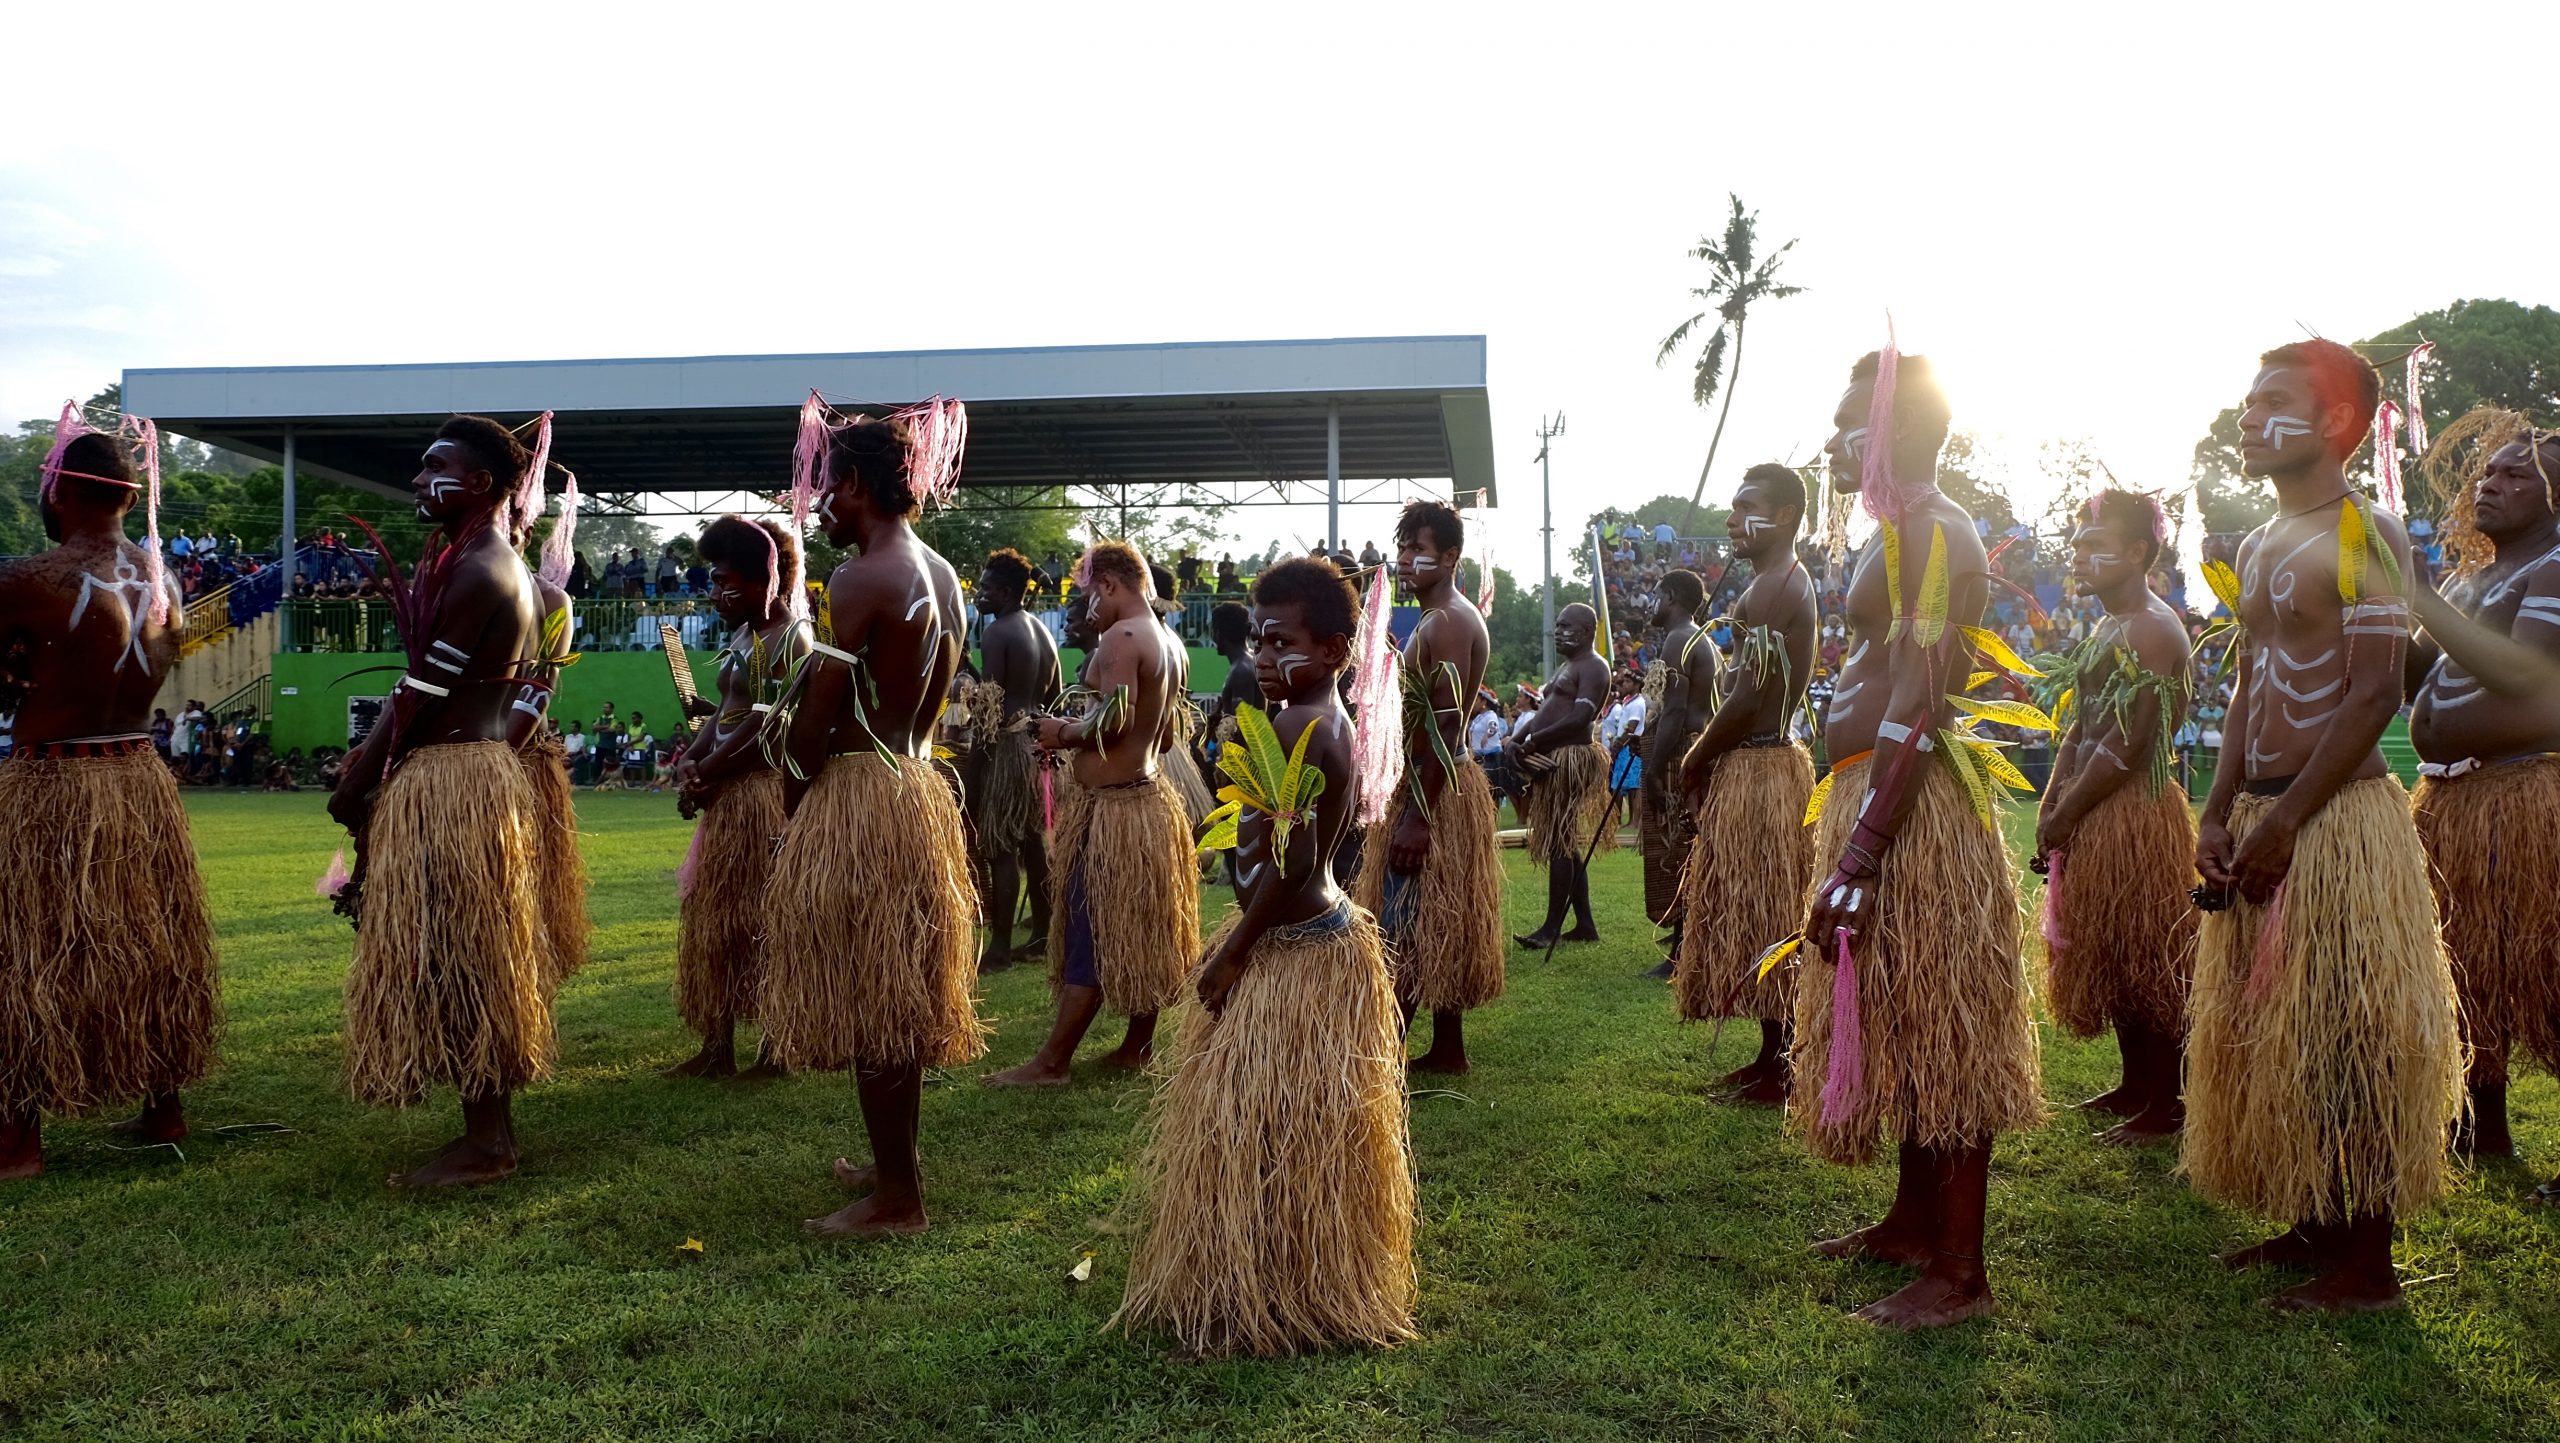 Let's dance! A cultural ceremony welcomes RAMSI guests to Solomon